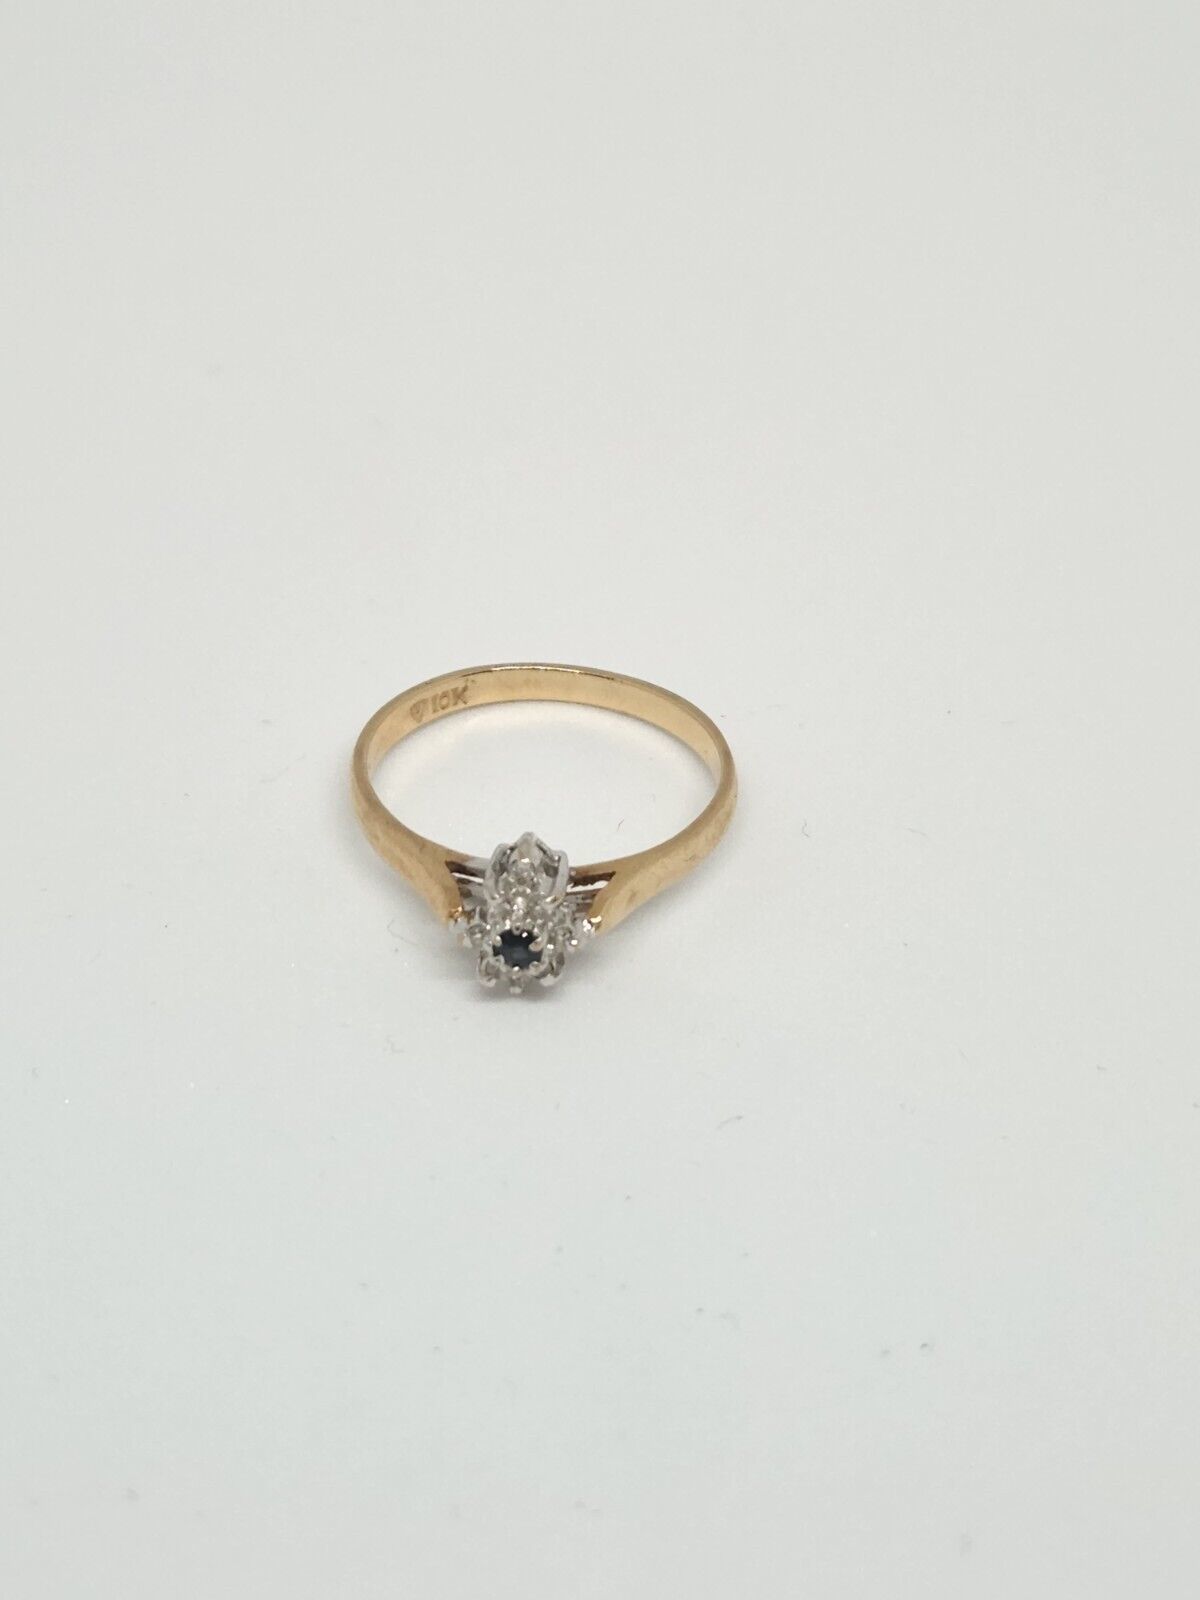 Primary image for 10K Yellow Gold Diamond Cluster Ring Black Gemstone Size 7 Engagement Jewelry